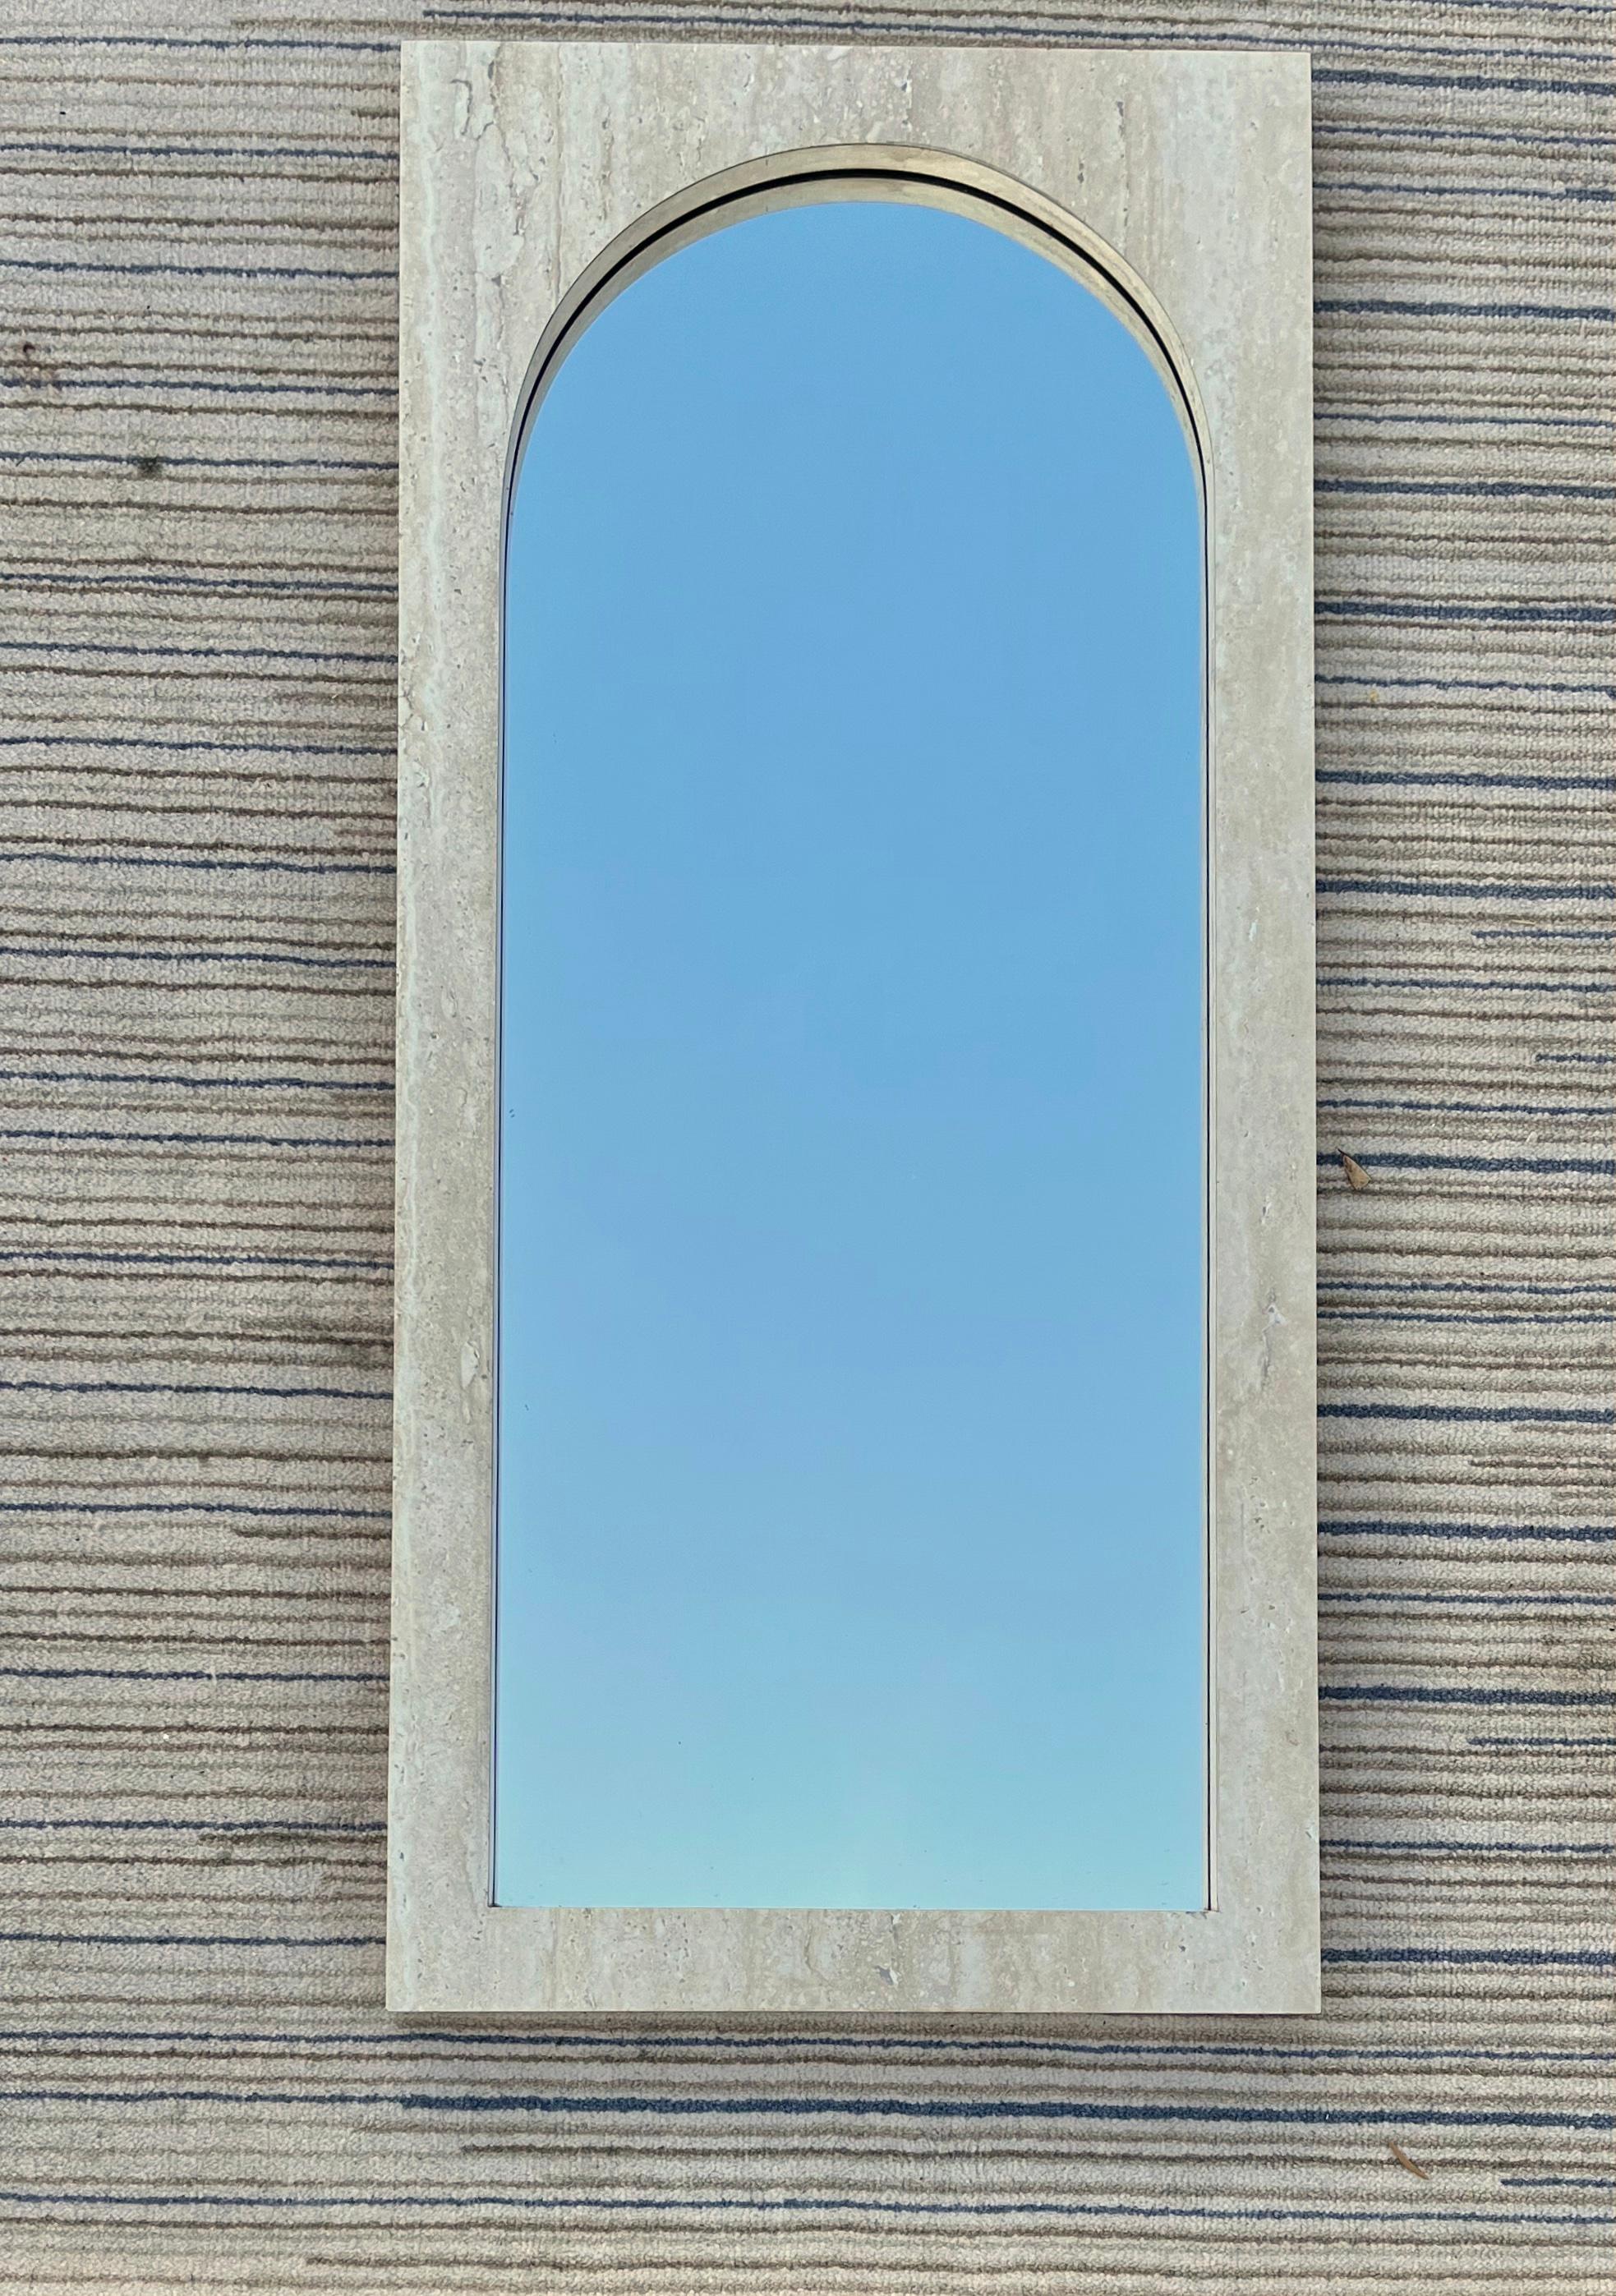 Large Vintage Postmodern marbleized wall mirror. Circa 1980s
Features a minimalist fully faux stone / marbleized pattern laminated frame with an arched top mirror. 
In excellent near mint original condition with very minor signs of wear and age.